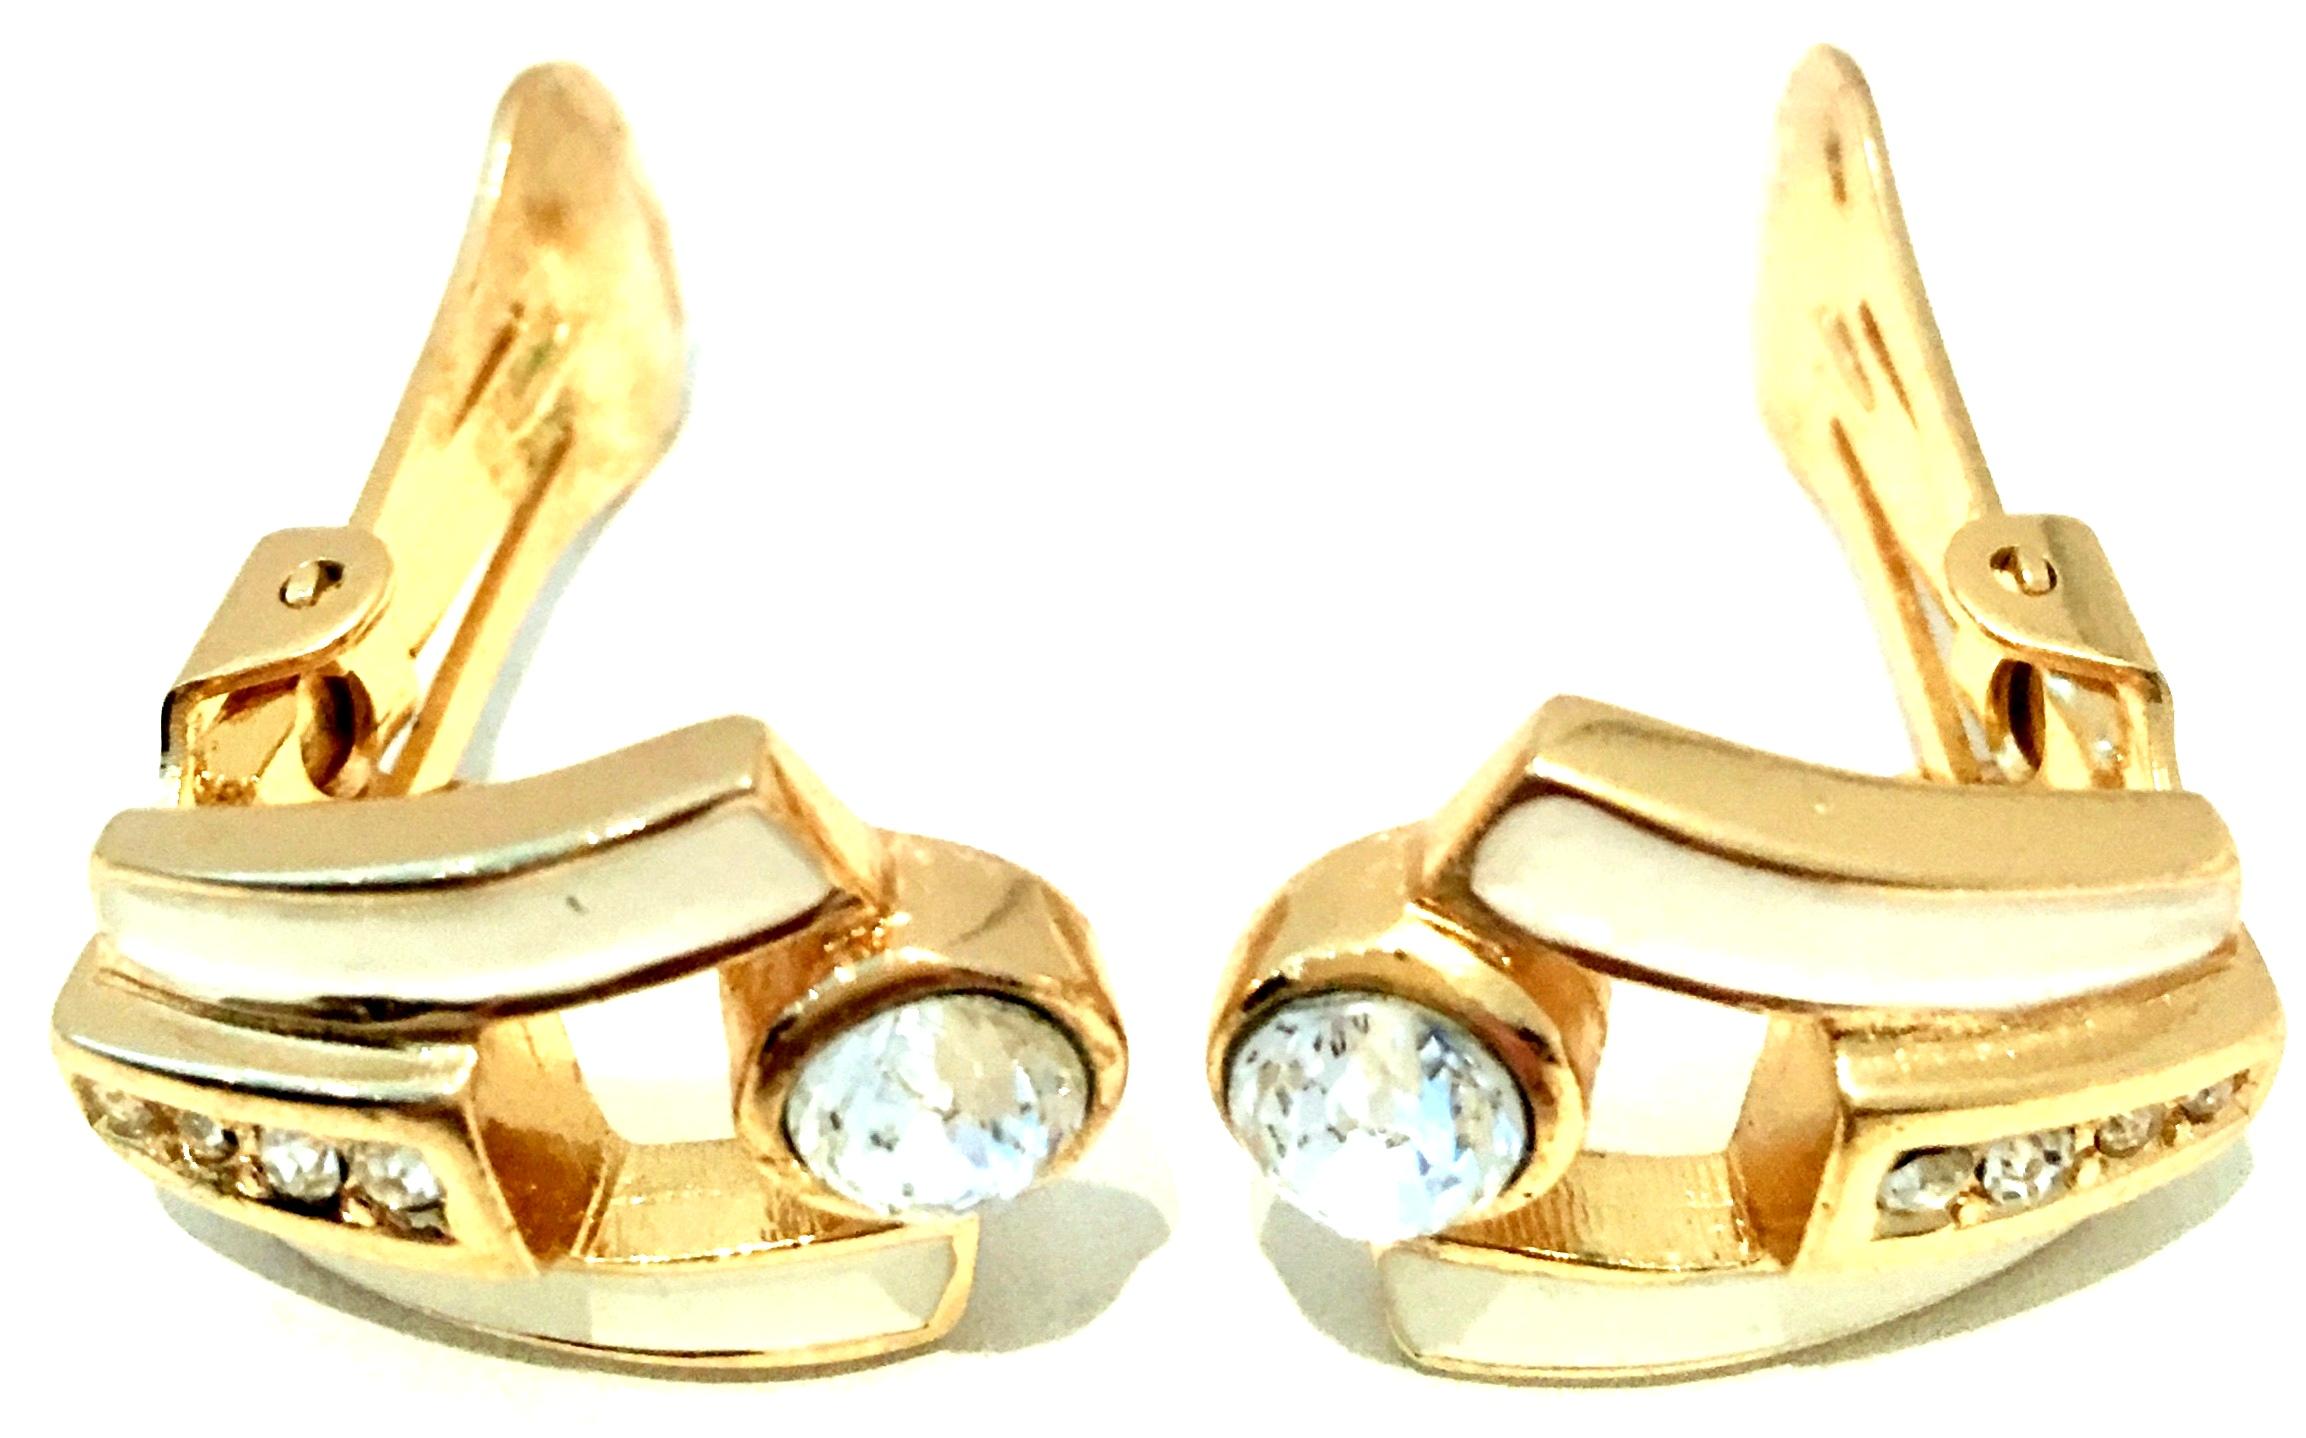 20th Century Gold Enamel & Swarovksi Crystal Earrings By, Christian Dior For Sale 1